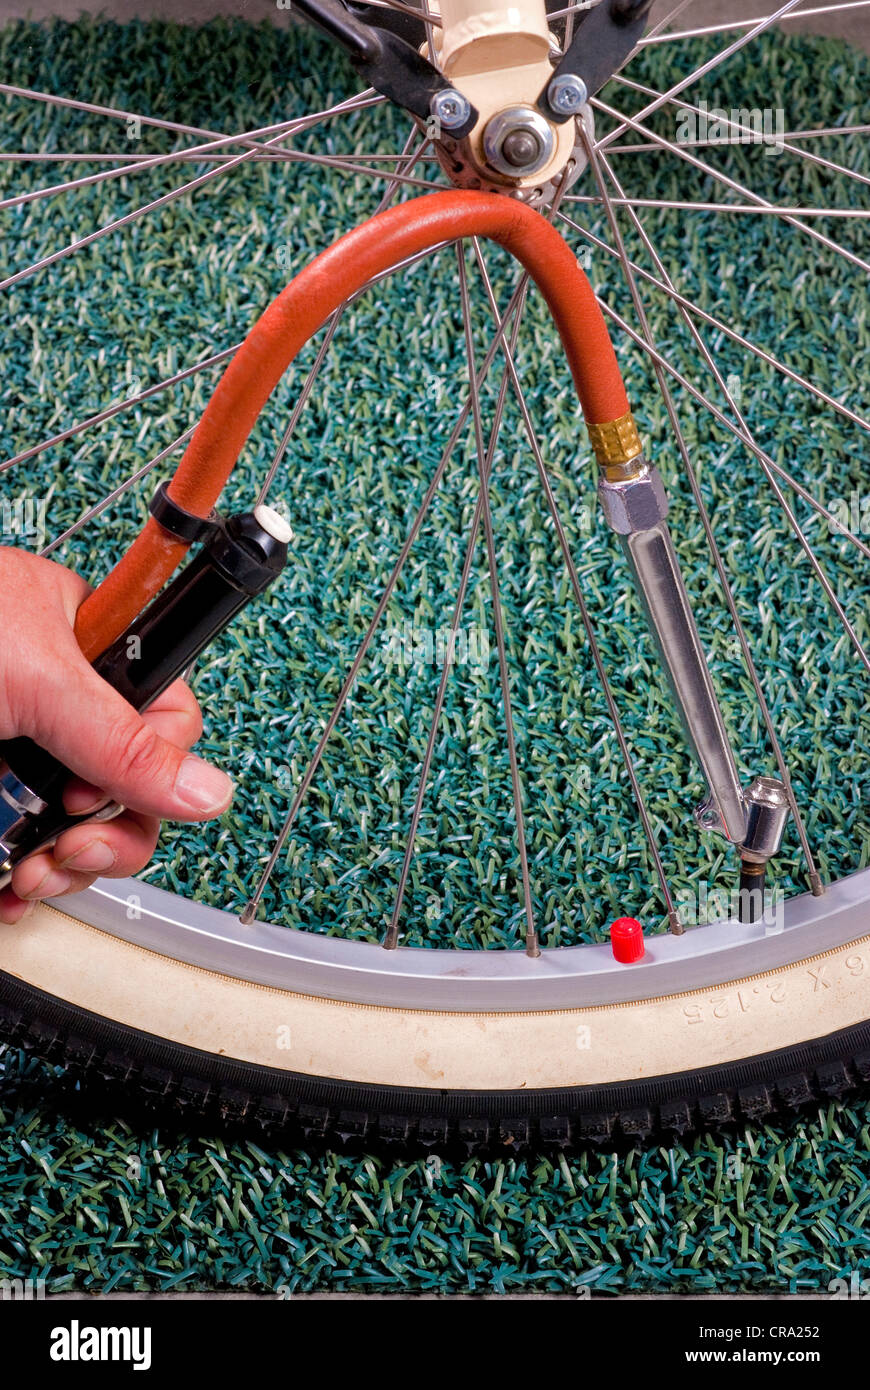 Compressed air is used to fill this bike tire Stock Photo